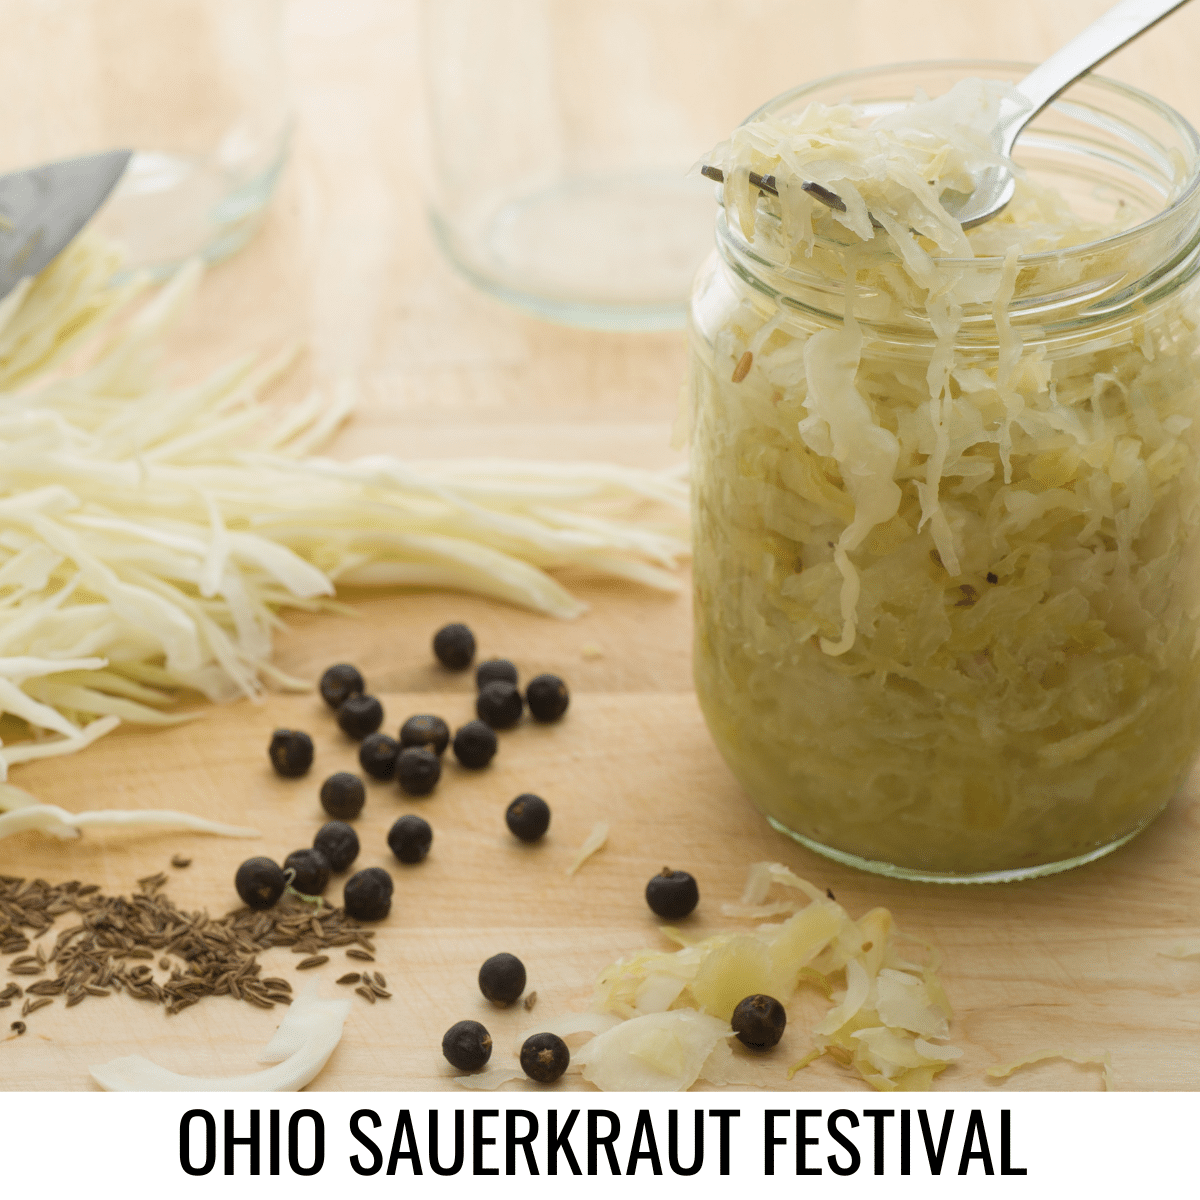 square image with a photo of a jar of sauerkraut with a fork in, some shredded cabbage and peppercorns all on a wooden surface. A white strip at the bottom has the text Ohio Sauerkraut Festival. Image via Canva pro license